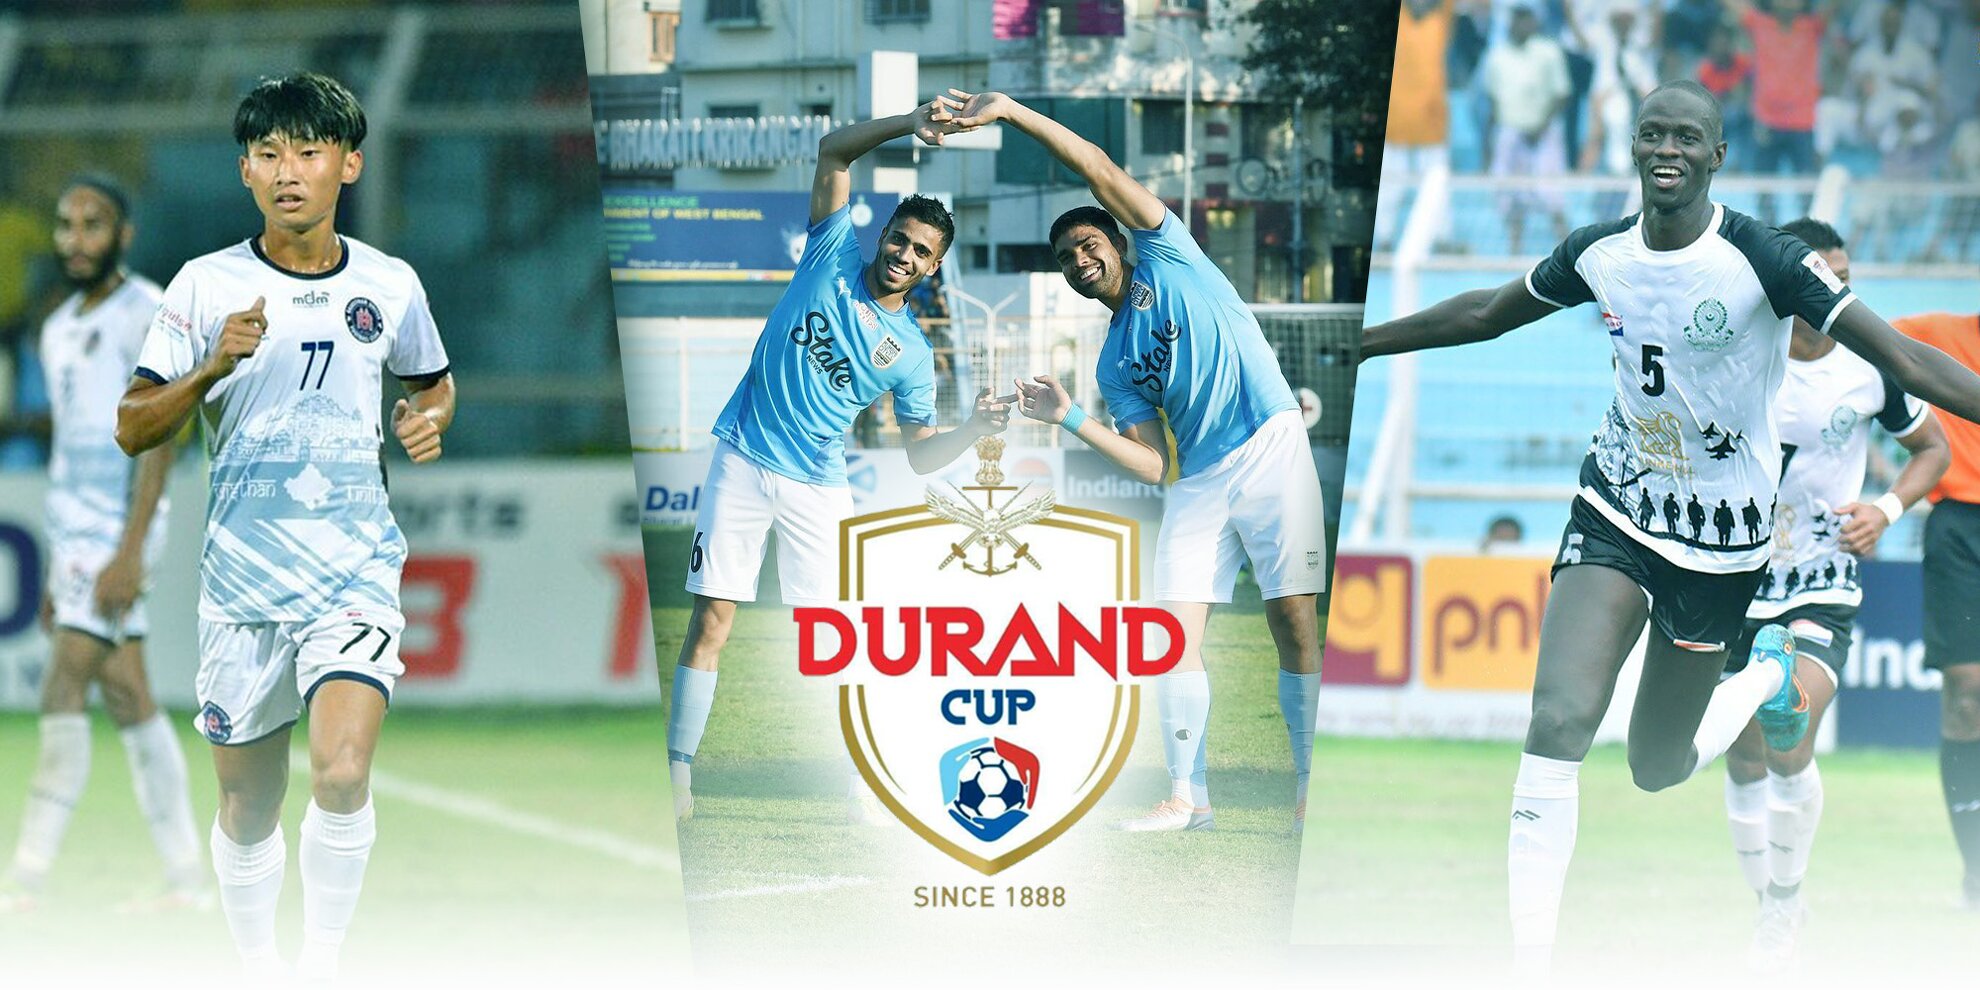 Durand Cup 2022